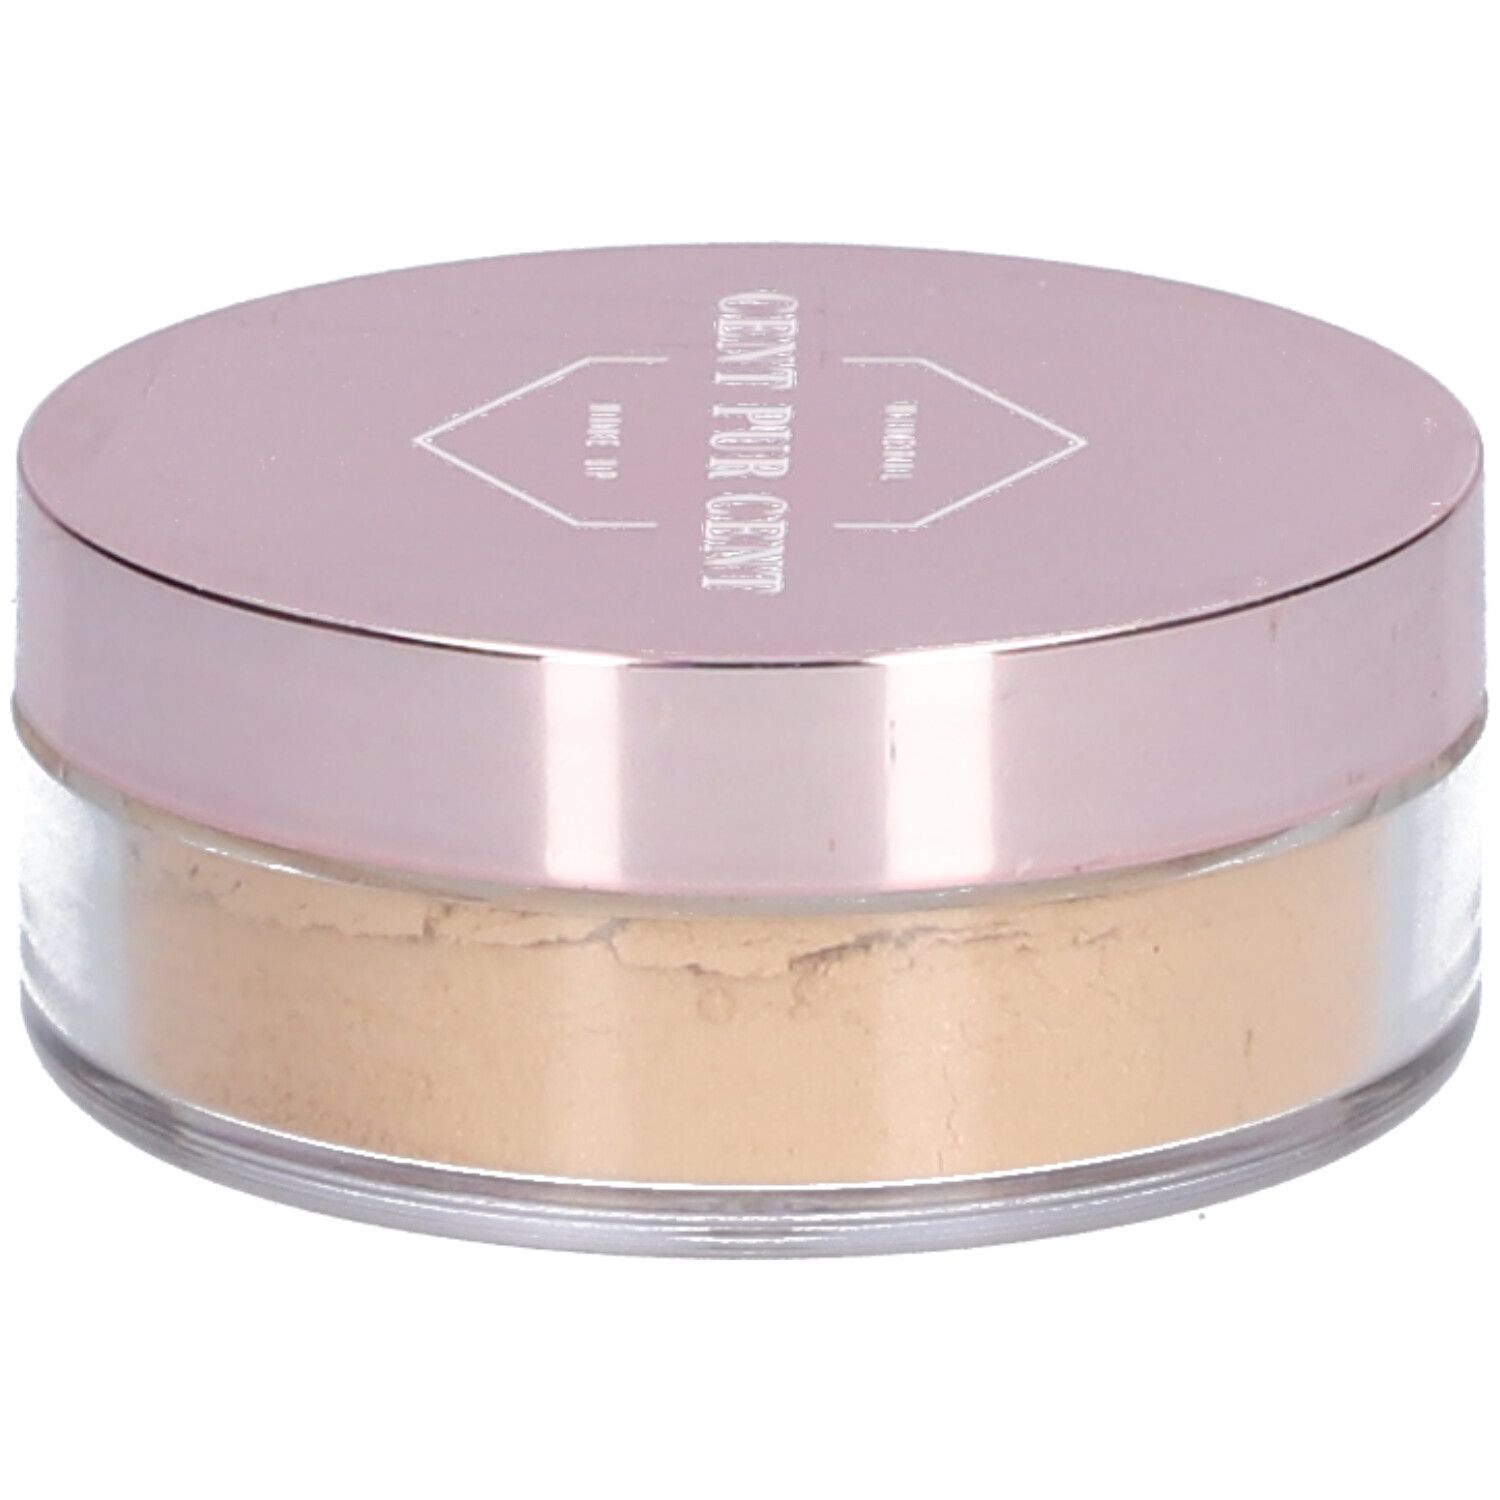 Cent Pur Cent Loose Mineral Foundation 3.5